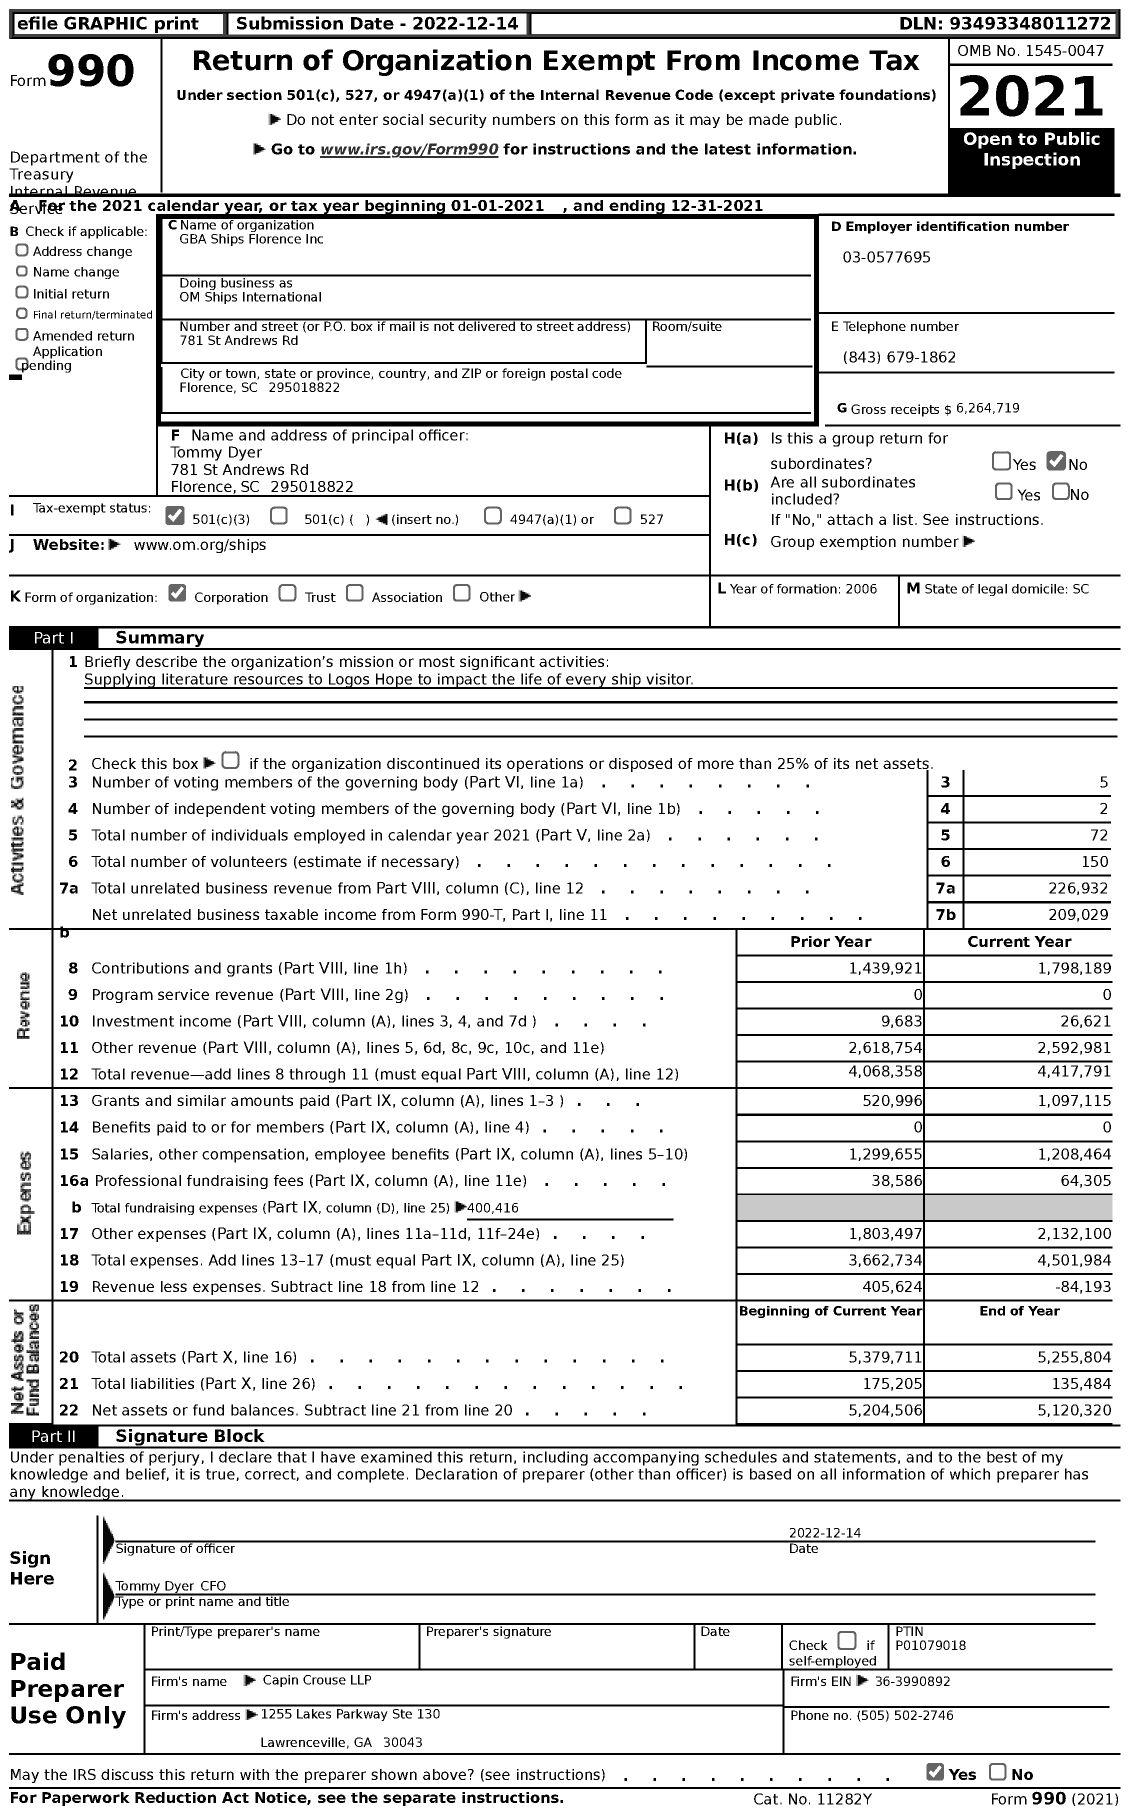 Image of first page of 2021 Form 990 for OM Ships International